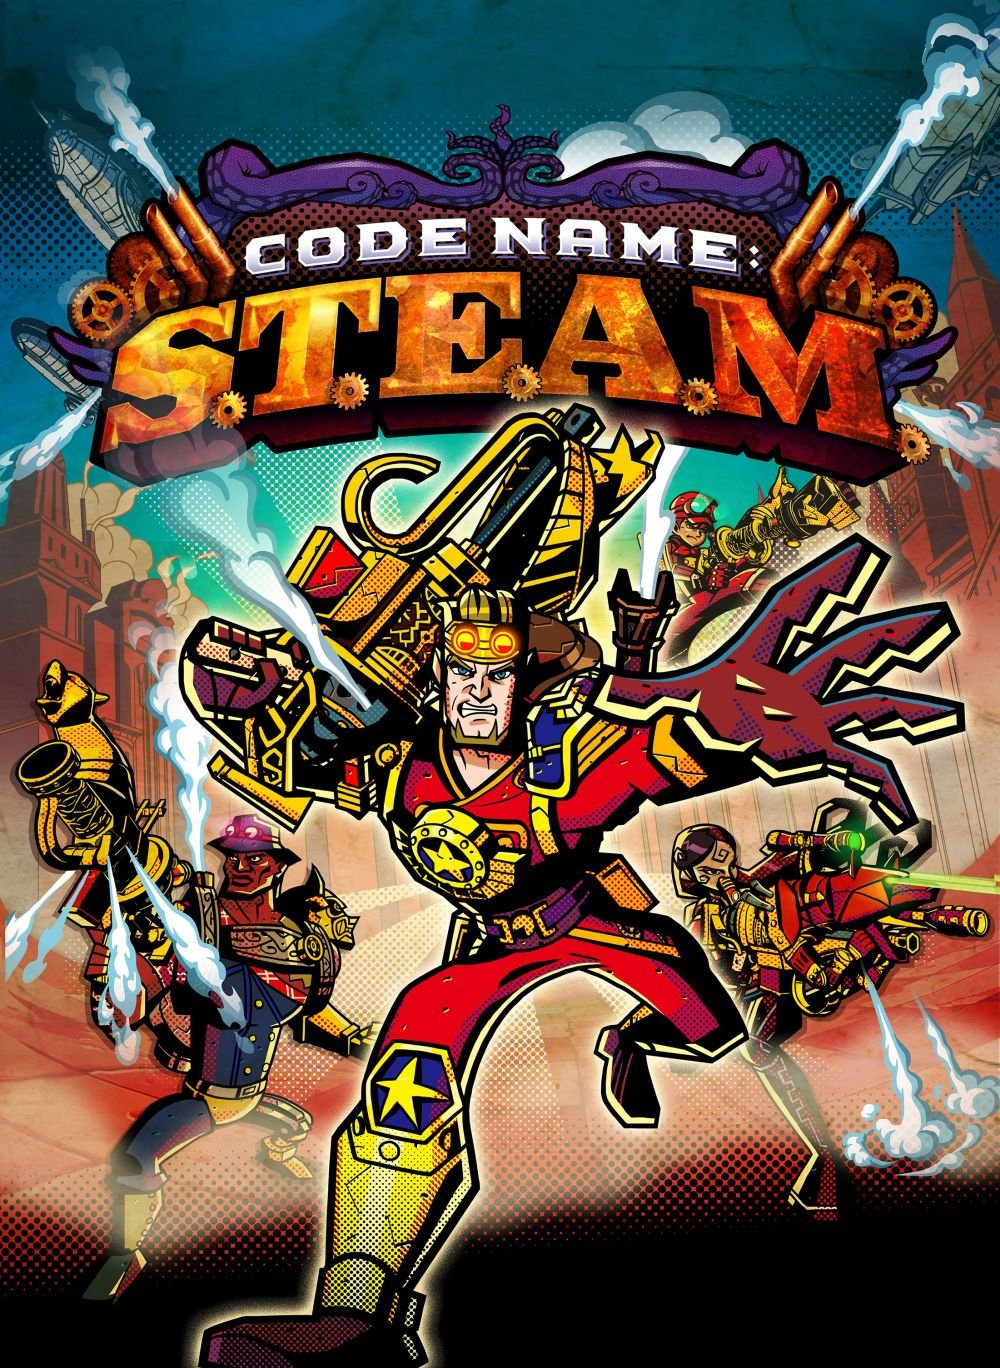 Image of Code name S.T.E.A.M.